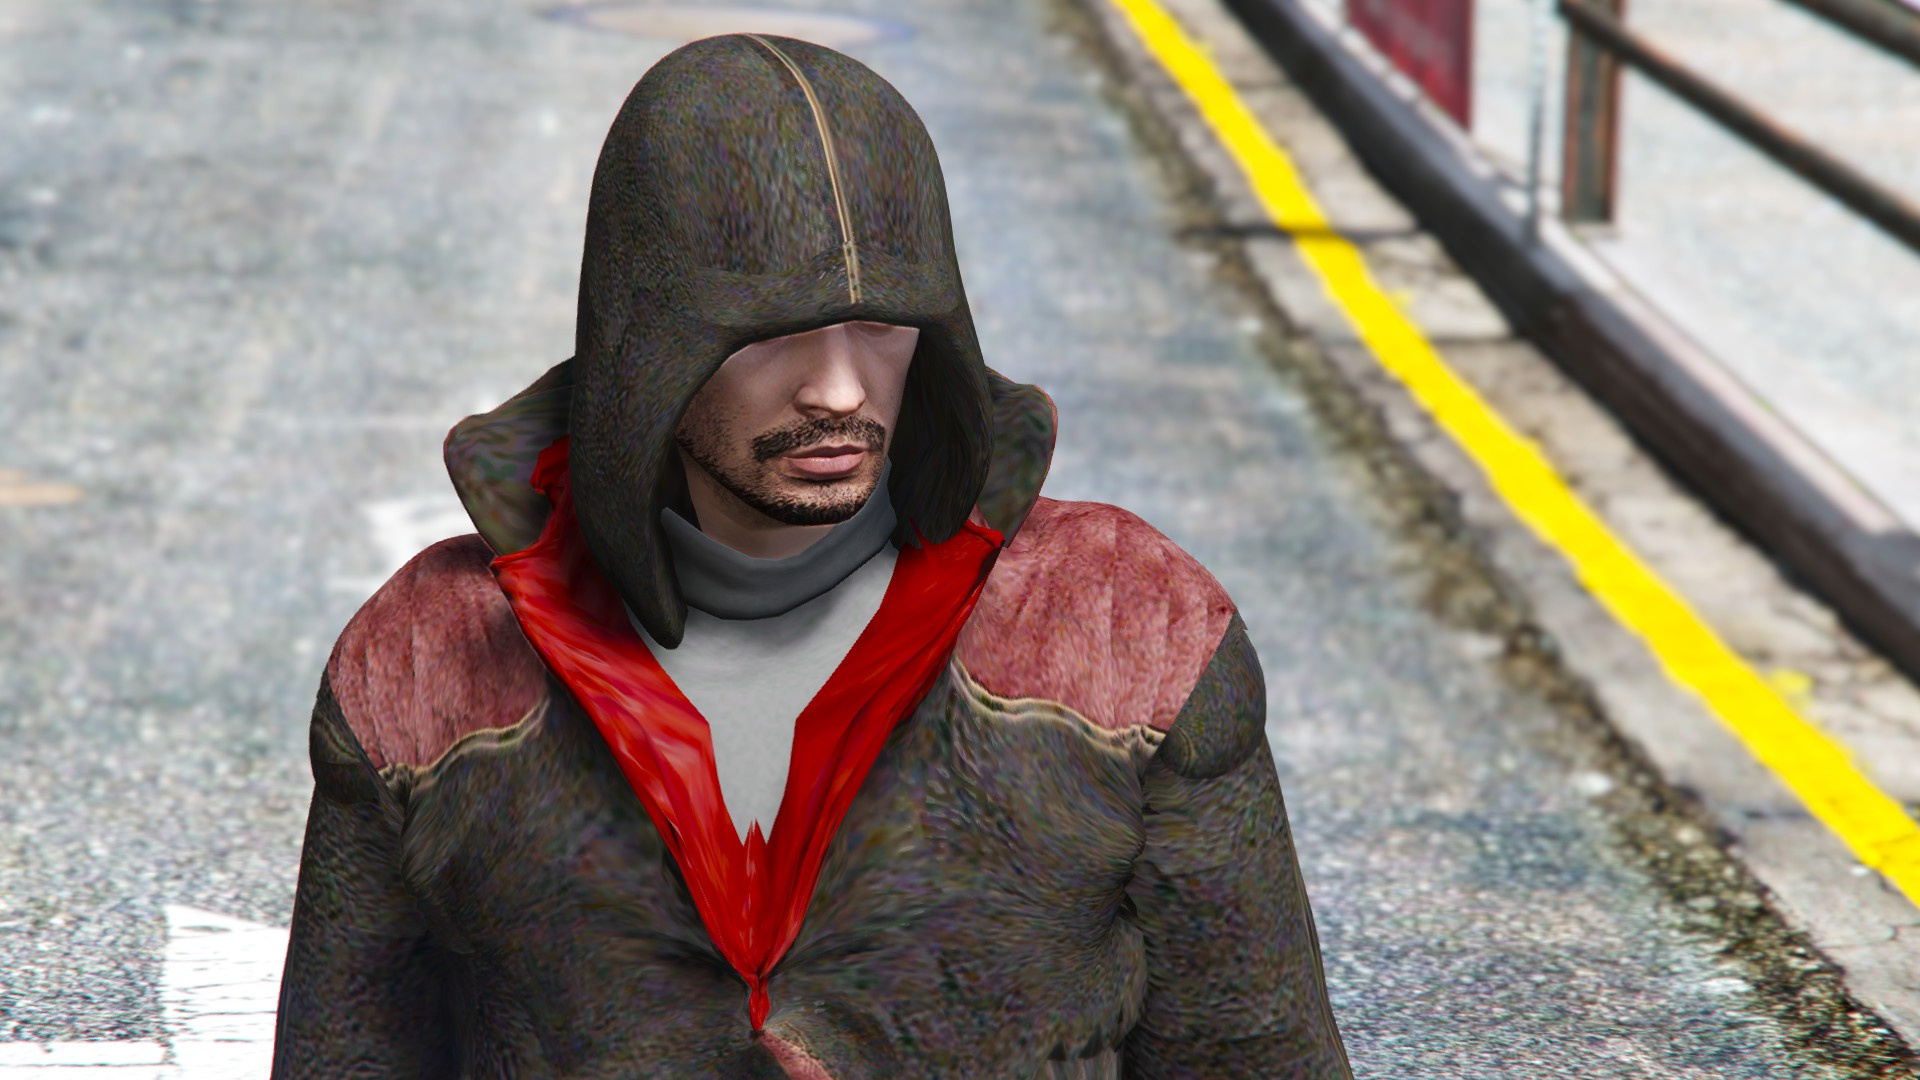 assassins creed modern day outfit